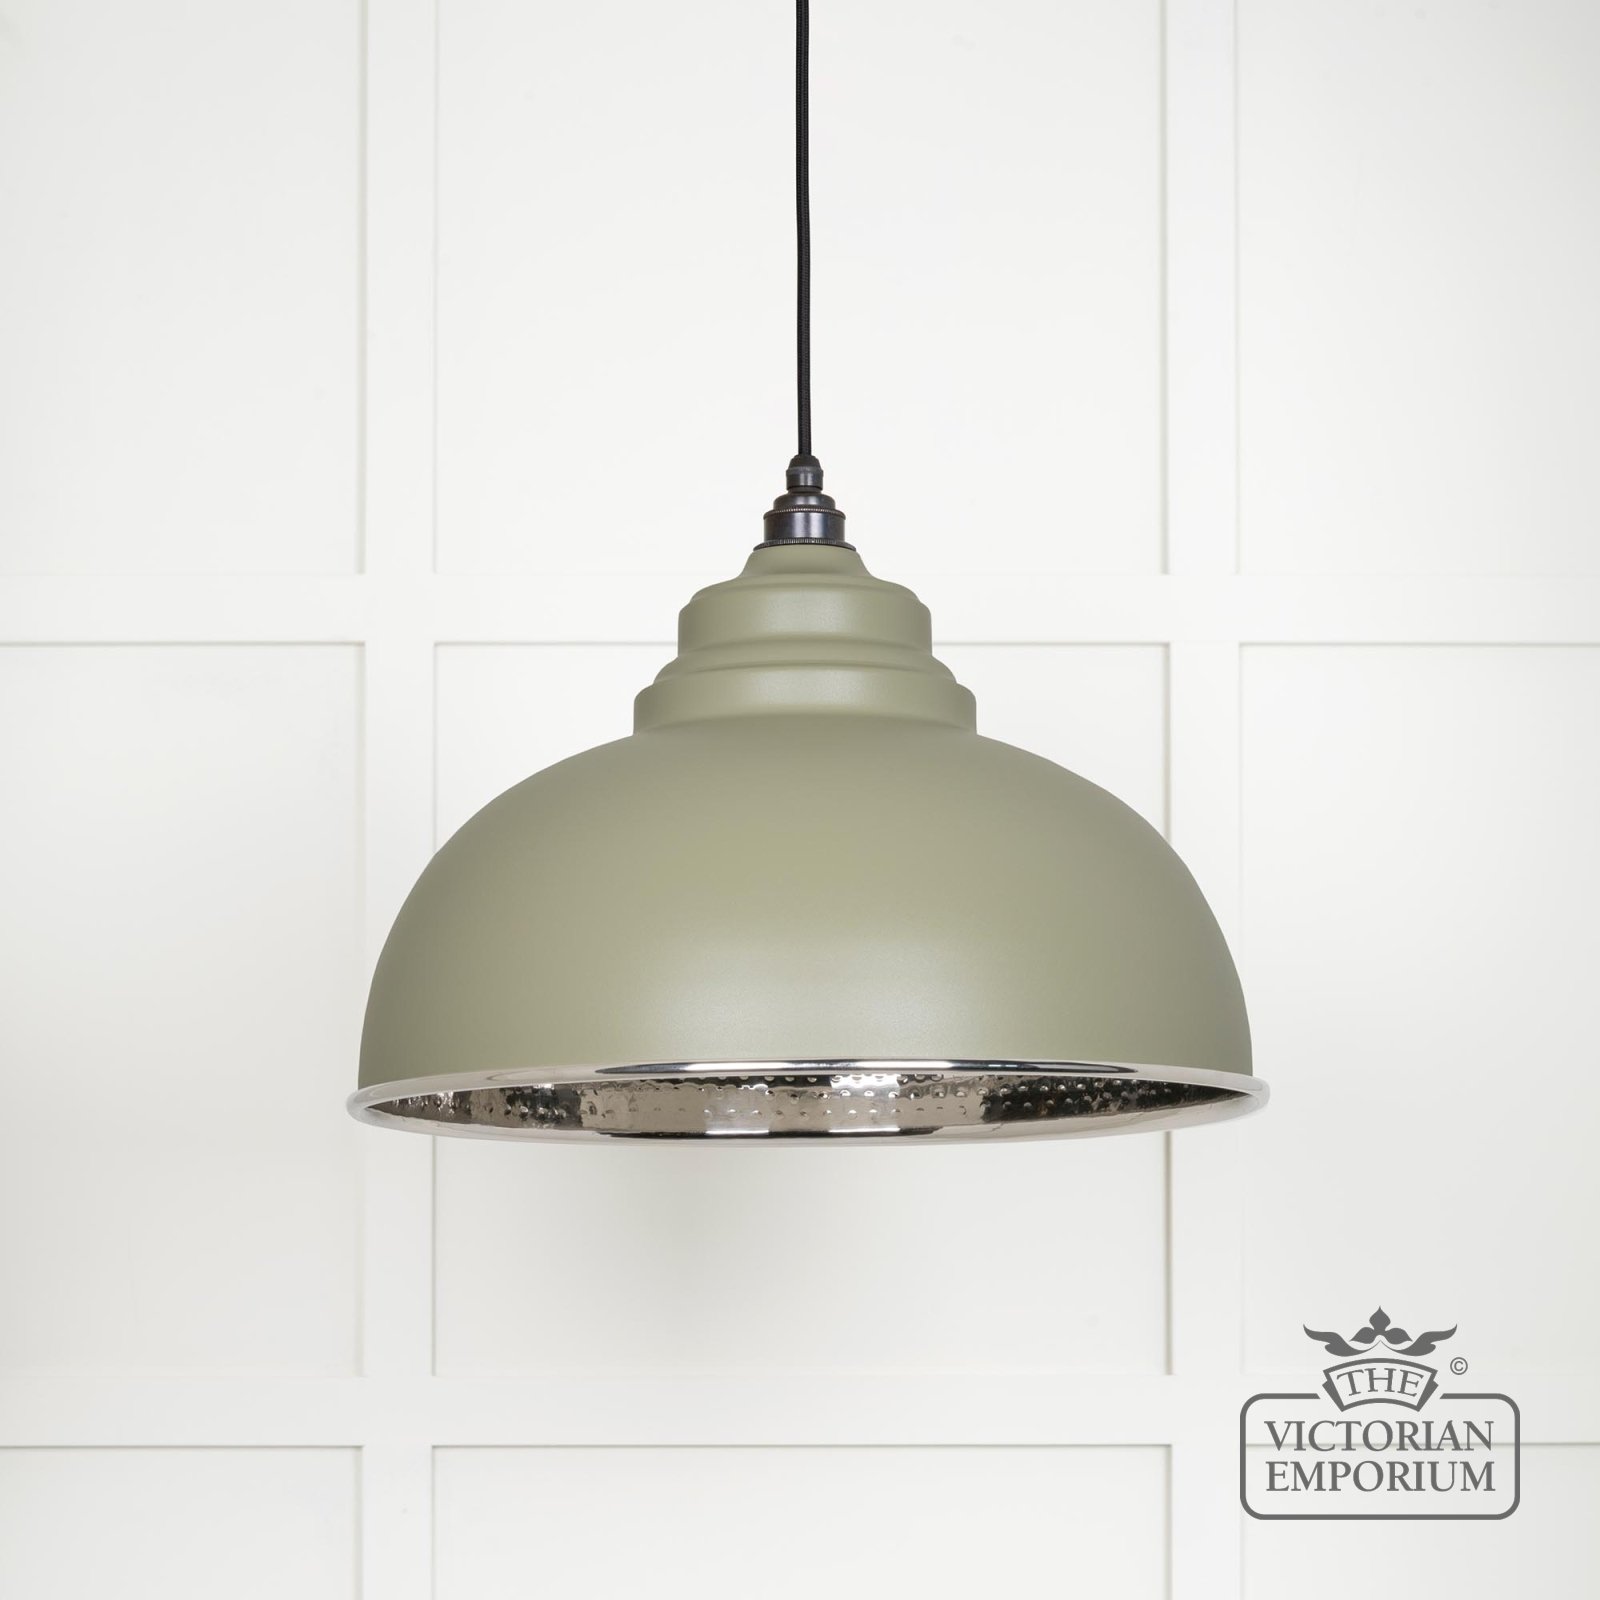 Harlow pendant light in hammered nickel with tump exterior